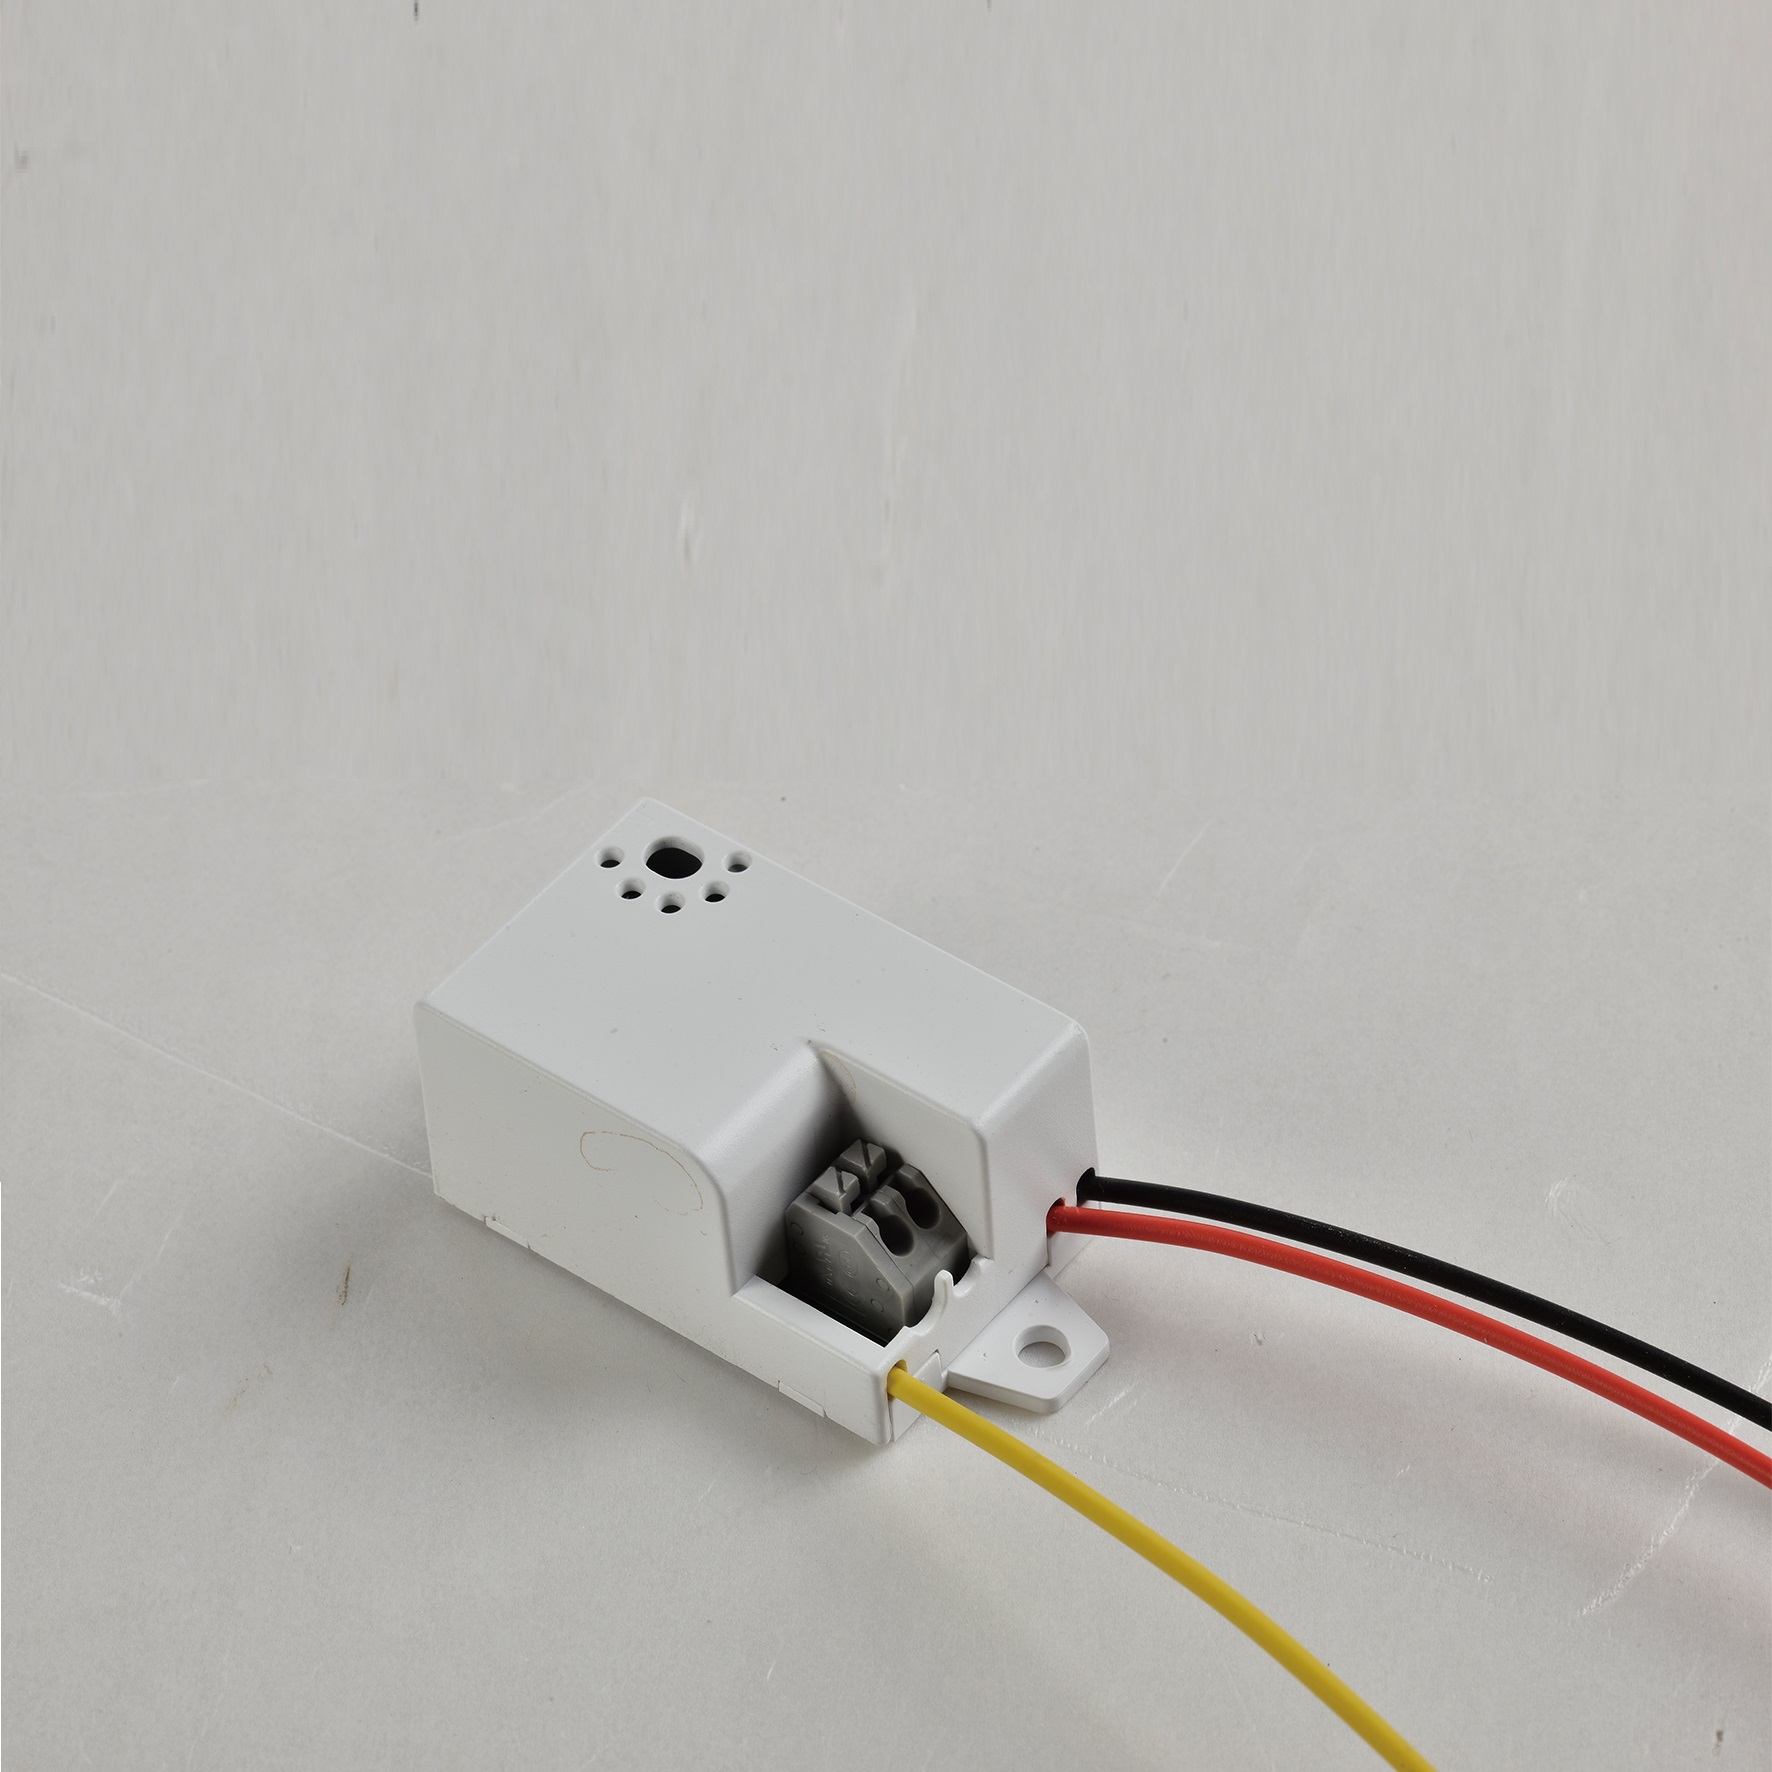 The built-in sound control switch module of the ceiling lamp is a hidden sound-light control delay switch